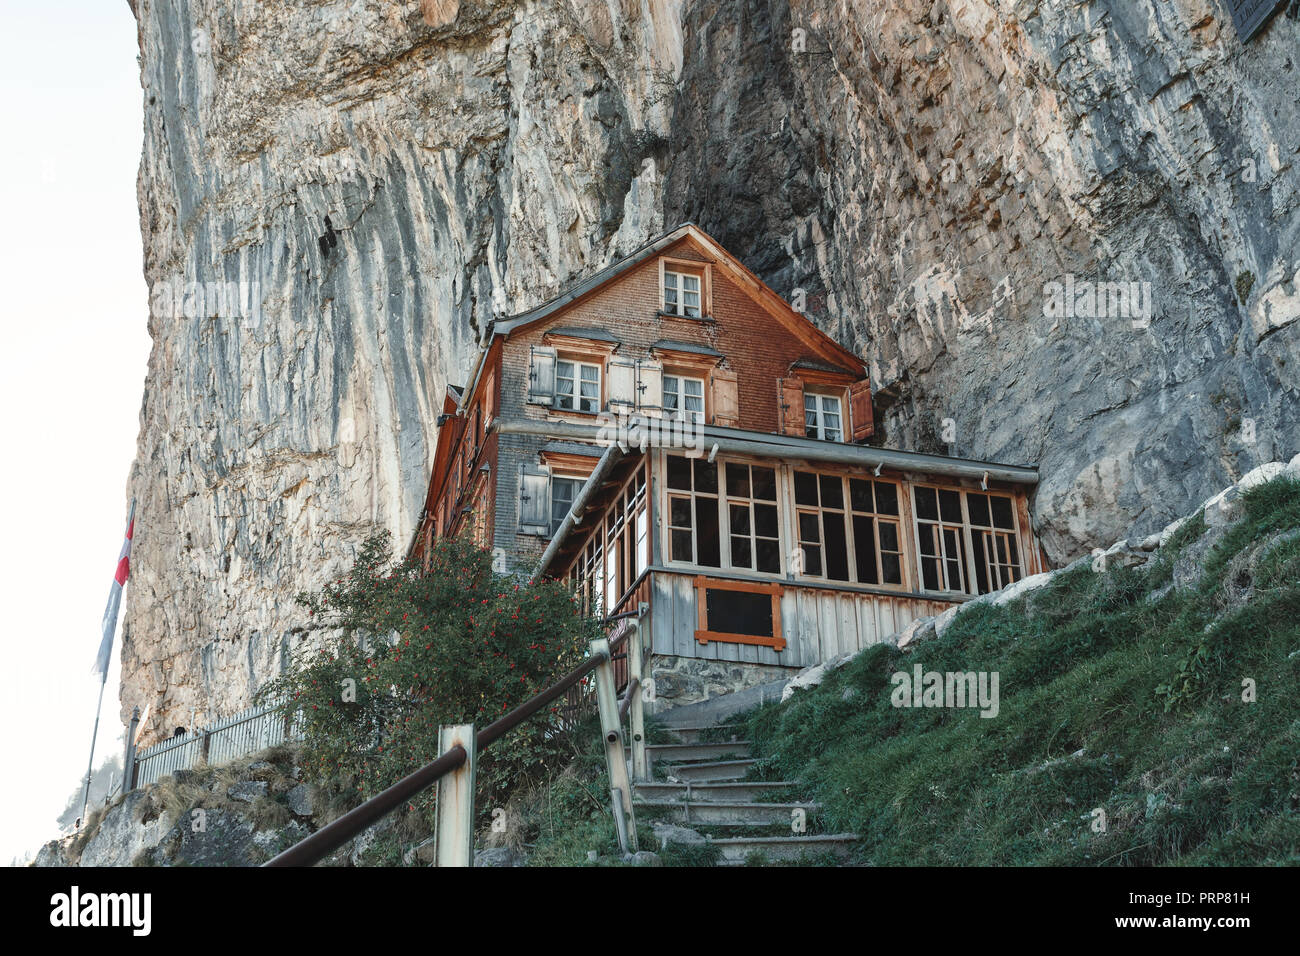 Traditional wooden mountain inn at the ebenalp rocks of Appenzell alps, Switzerland Stock Photo